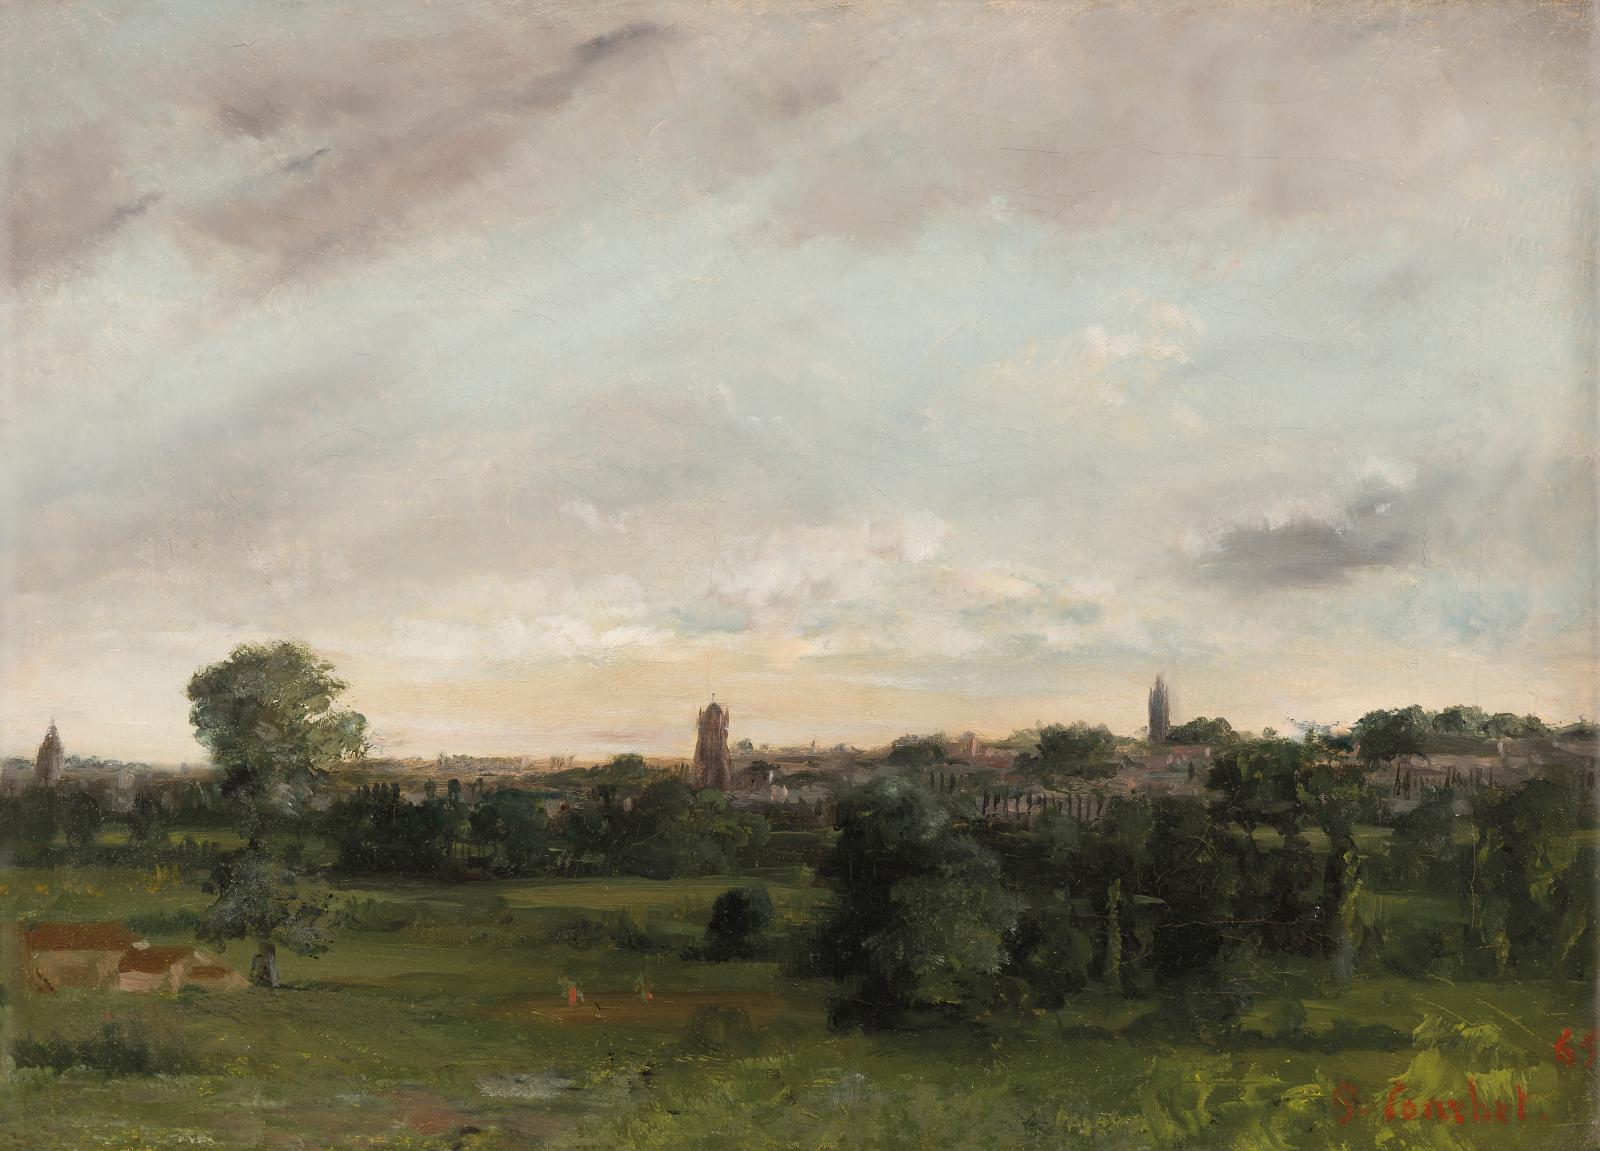 Gustave Courbet (1819-1877), View of Saintes, Taken From Lormont, oil on canvas, 32 x 46 cm/12.5 x 18.1 in.
Result: €140,800.